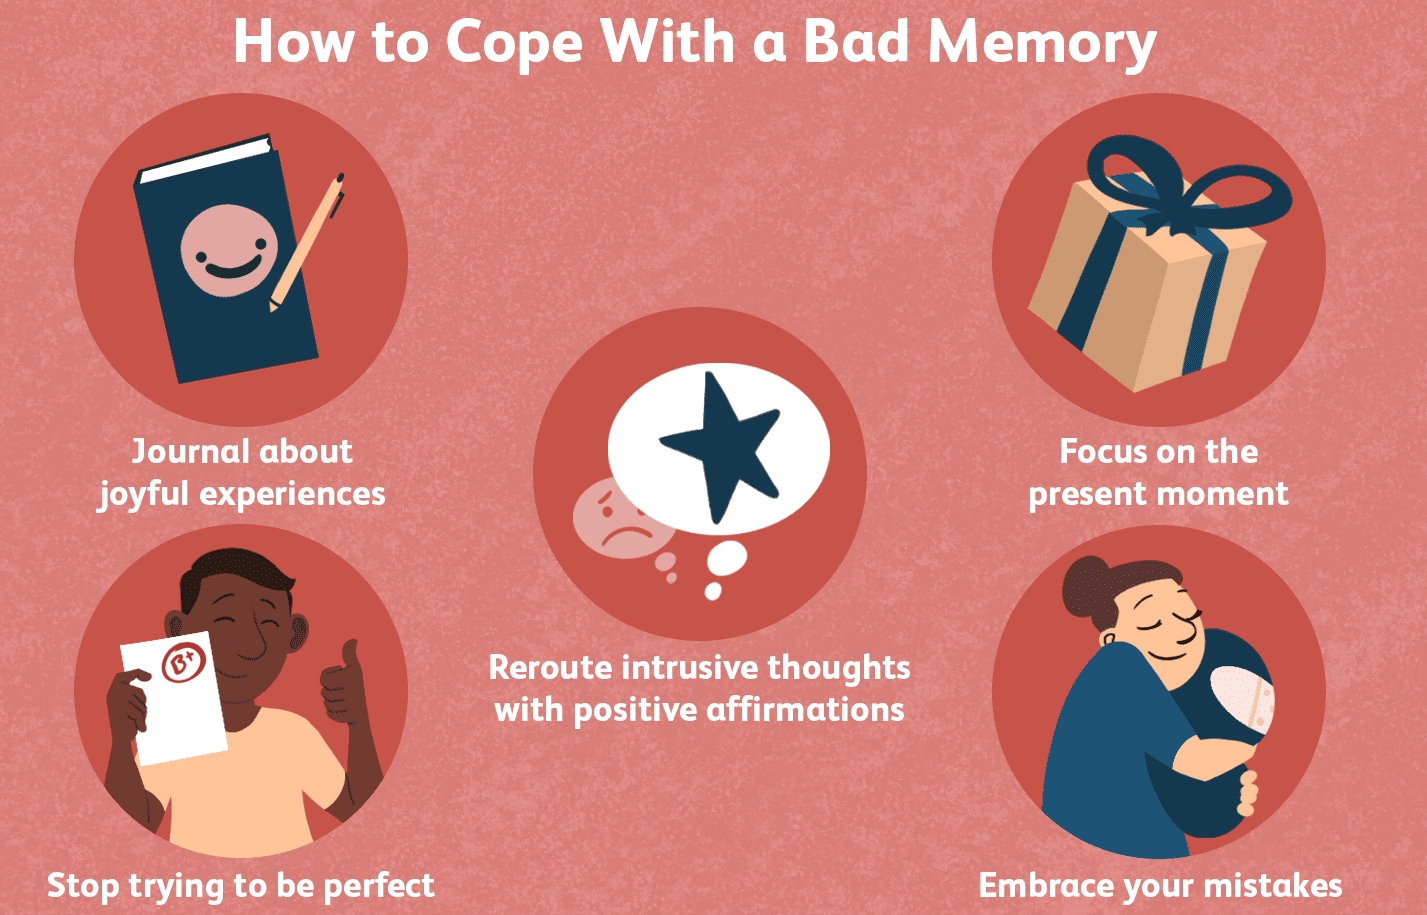 How to cope with a bad memory